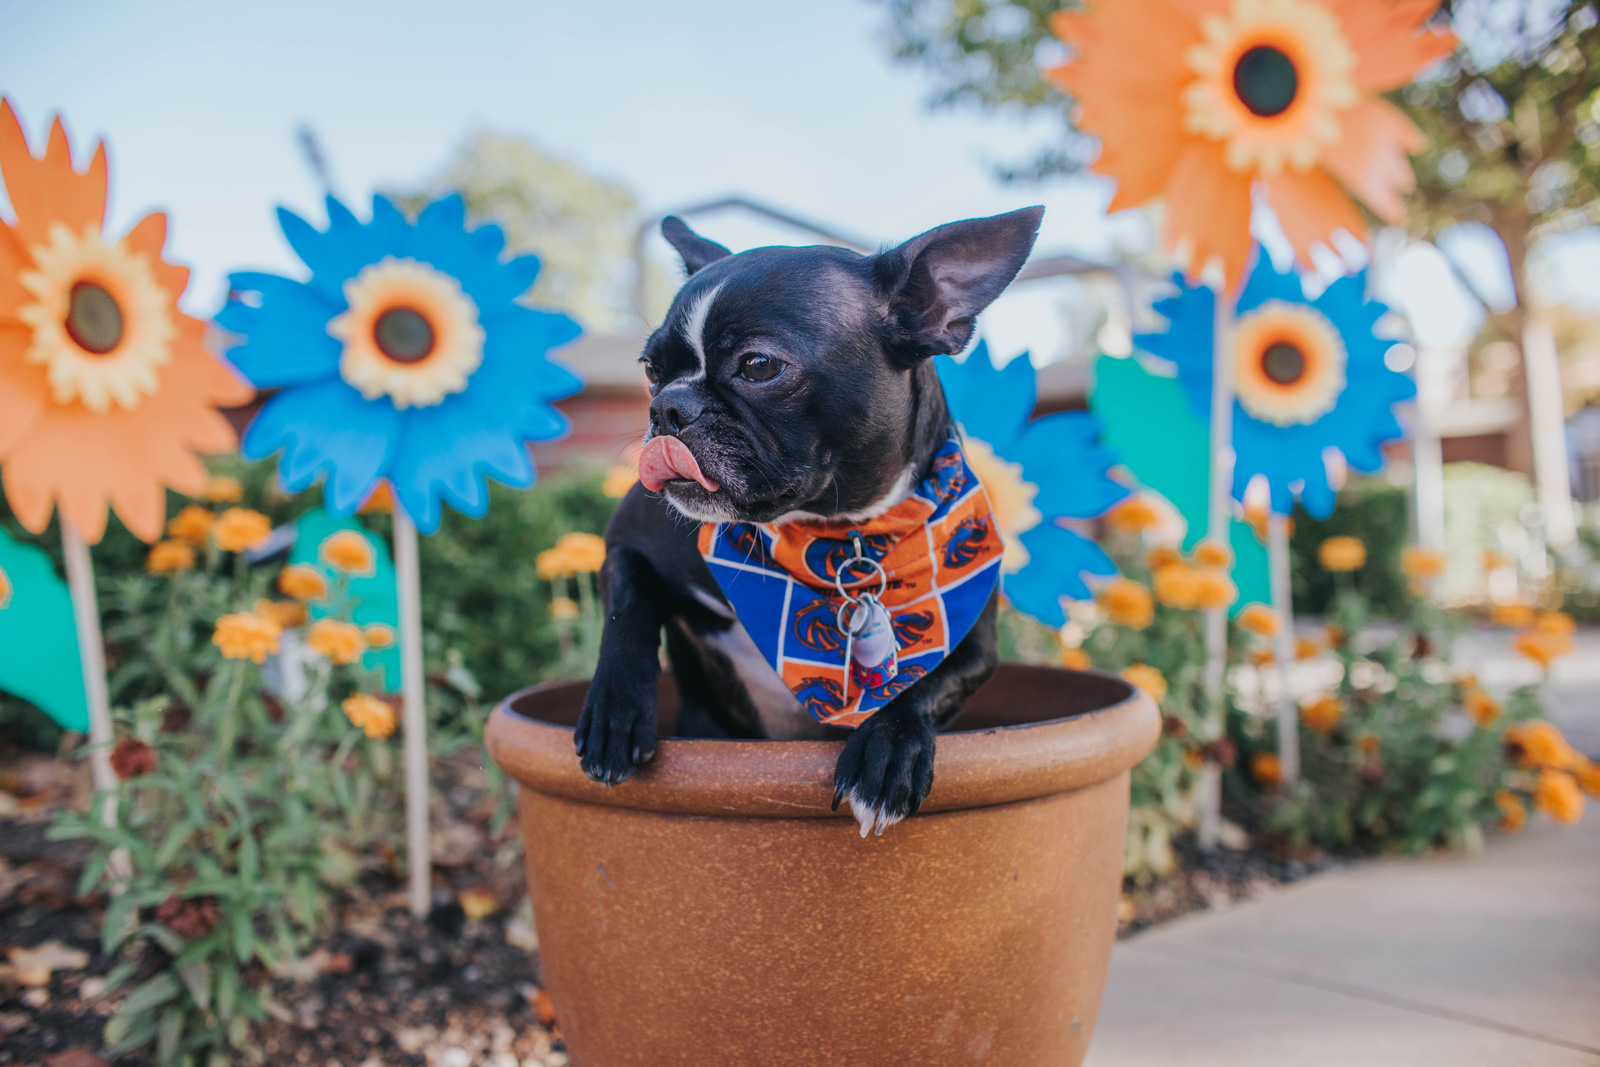 Poppy the black dog in a flower pot by blue and orange flowers